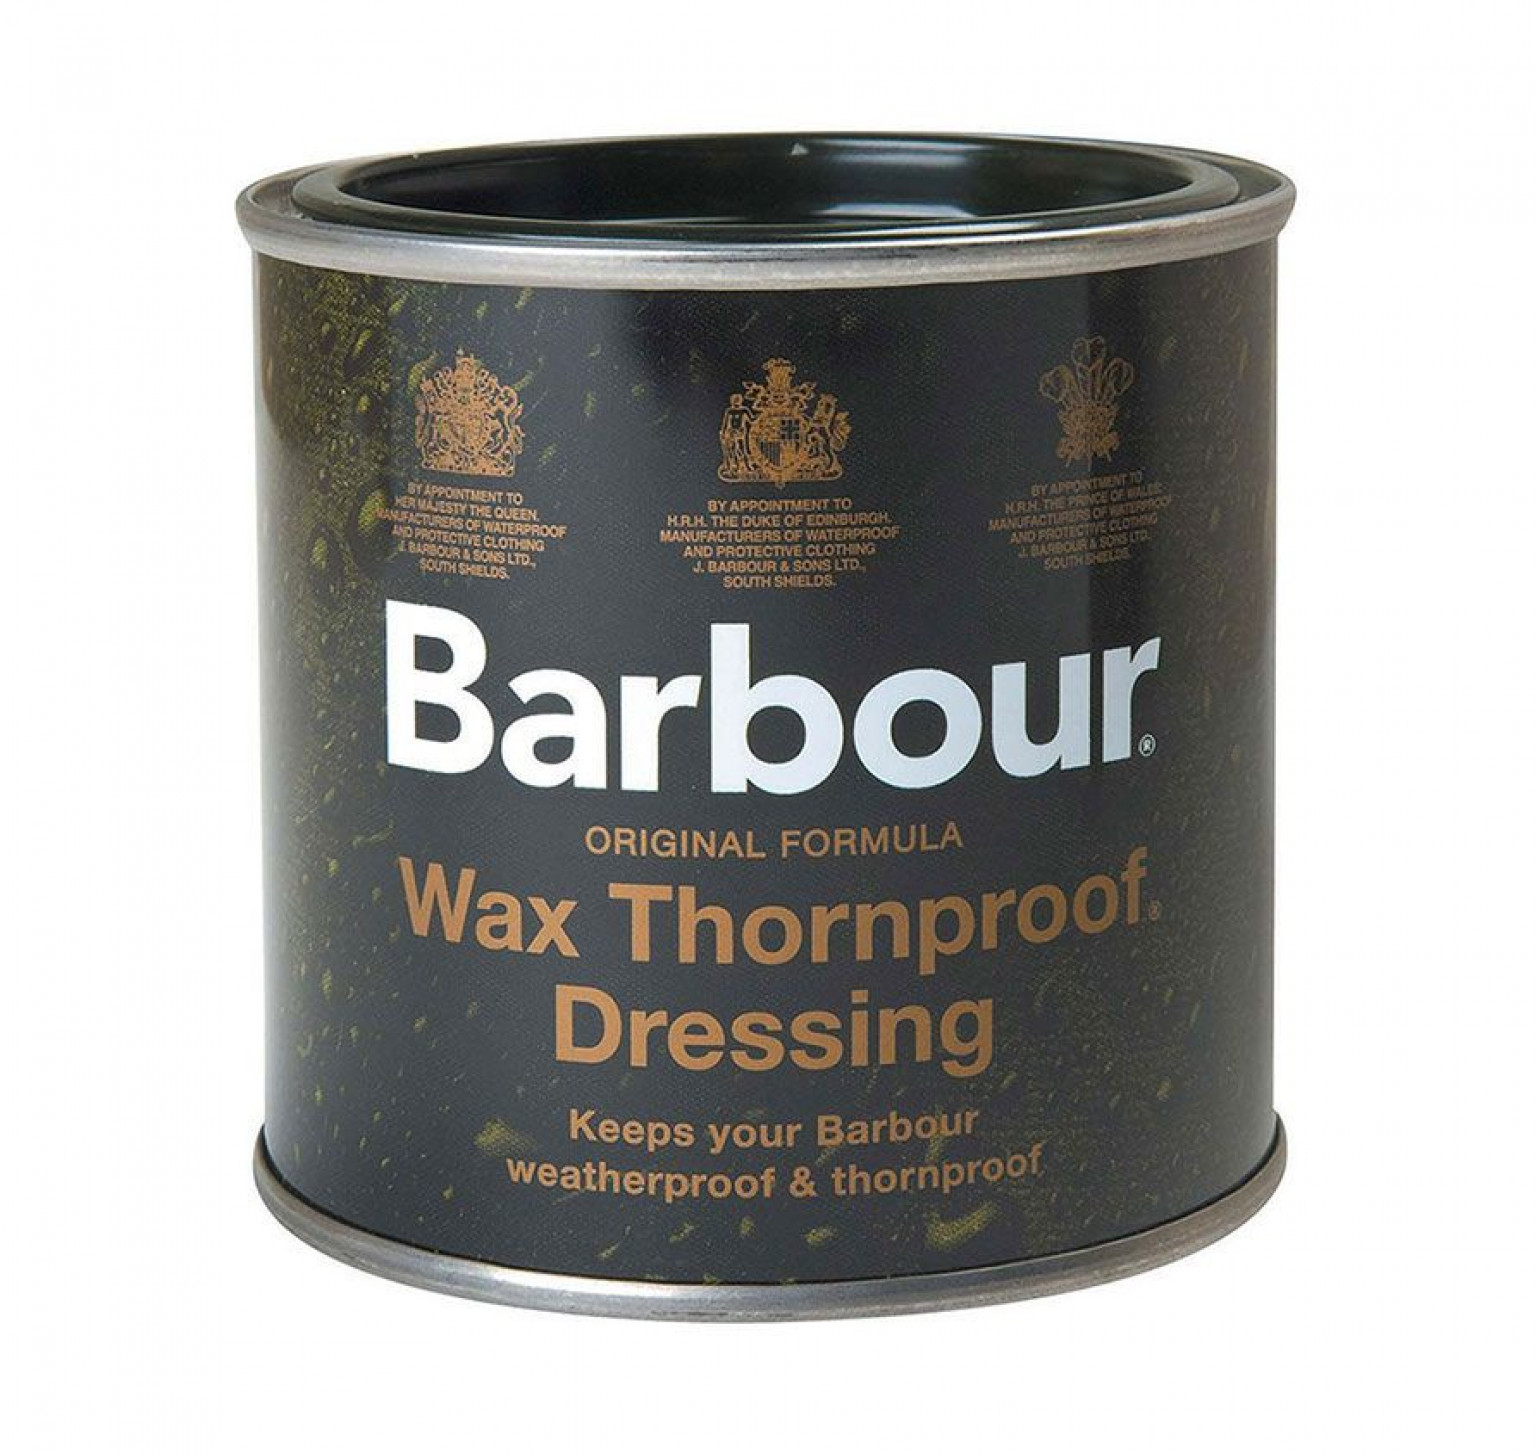 Barbour Thornproof Dressing Any